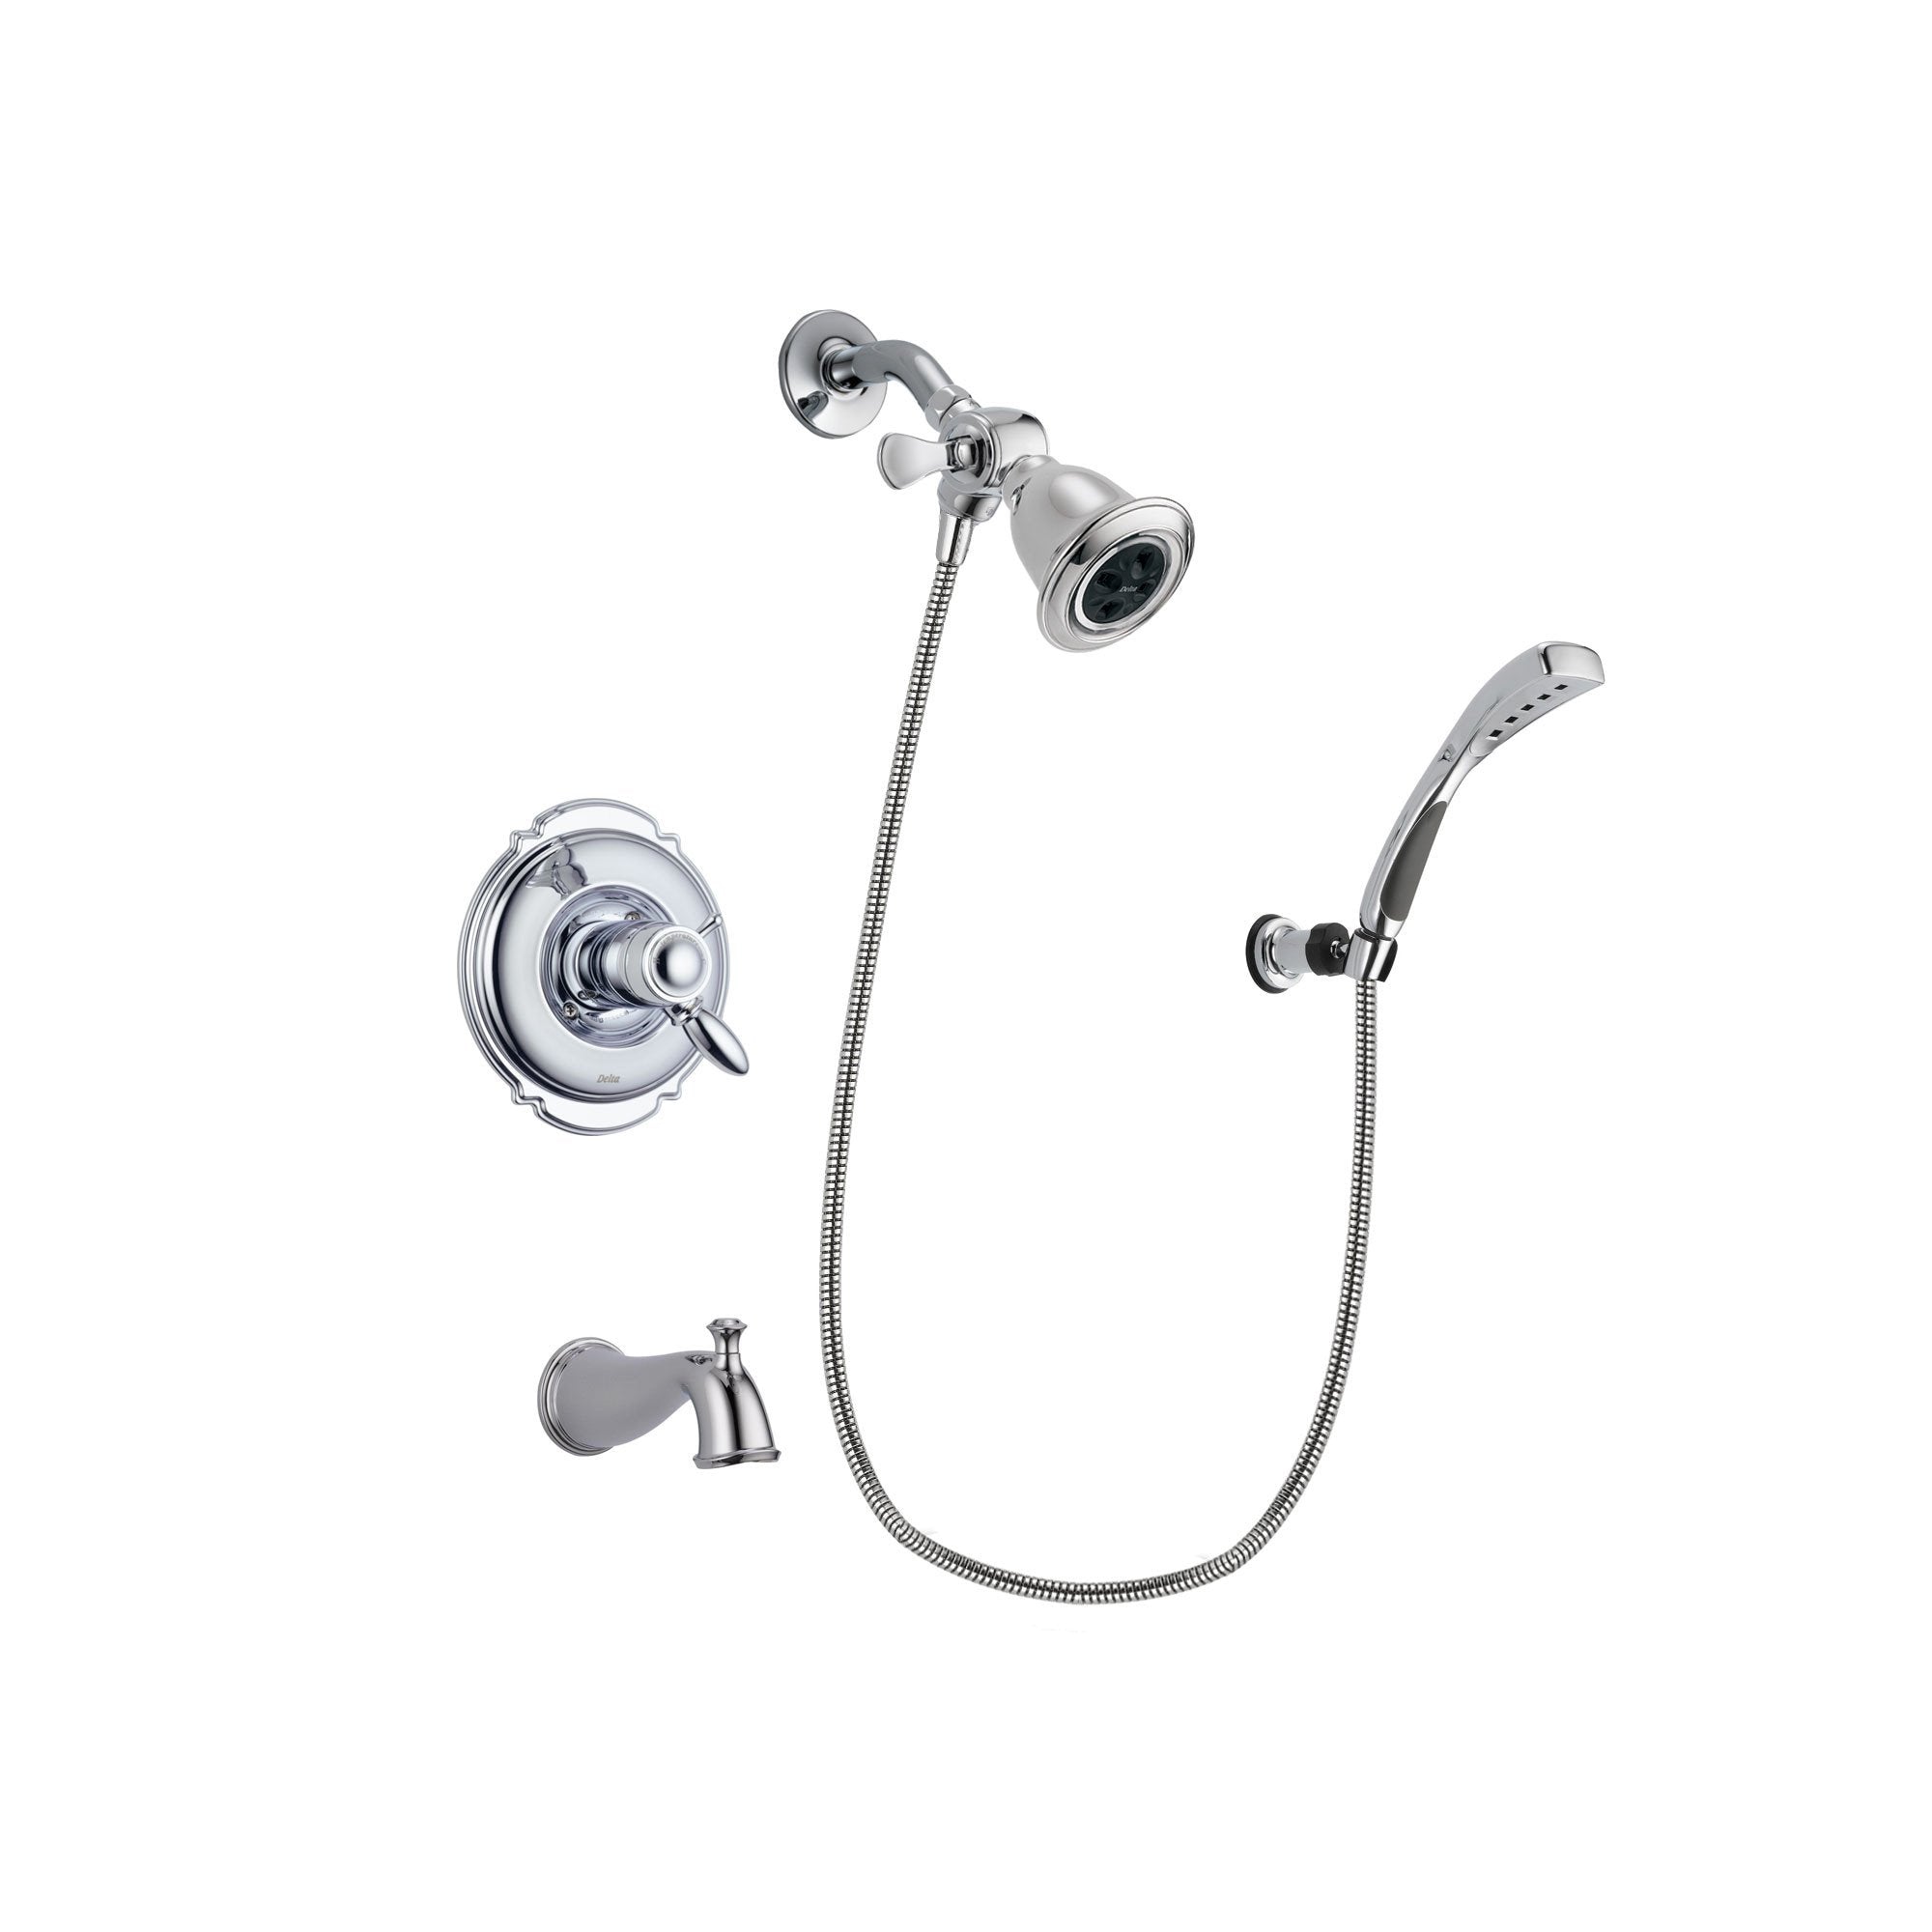 Delta Victorian Chrome Finish Thermostatic Tub and Shower Faucet System Package with Water Efficient Showerhead and Wall-Mount Bracket with Handheld Shower Spray Includes Rough-in Valve and Tub Spout DSP1005V